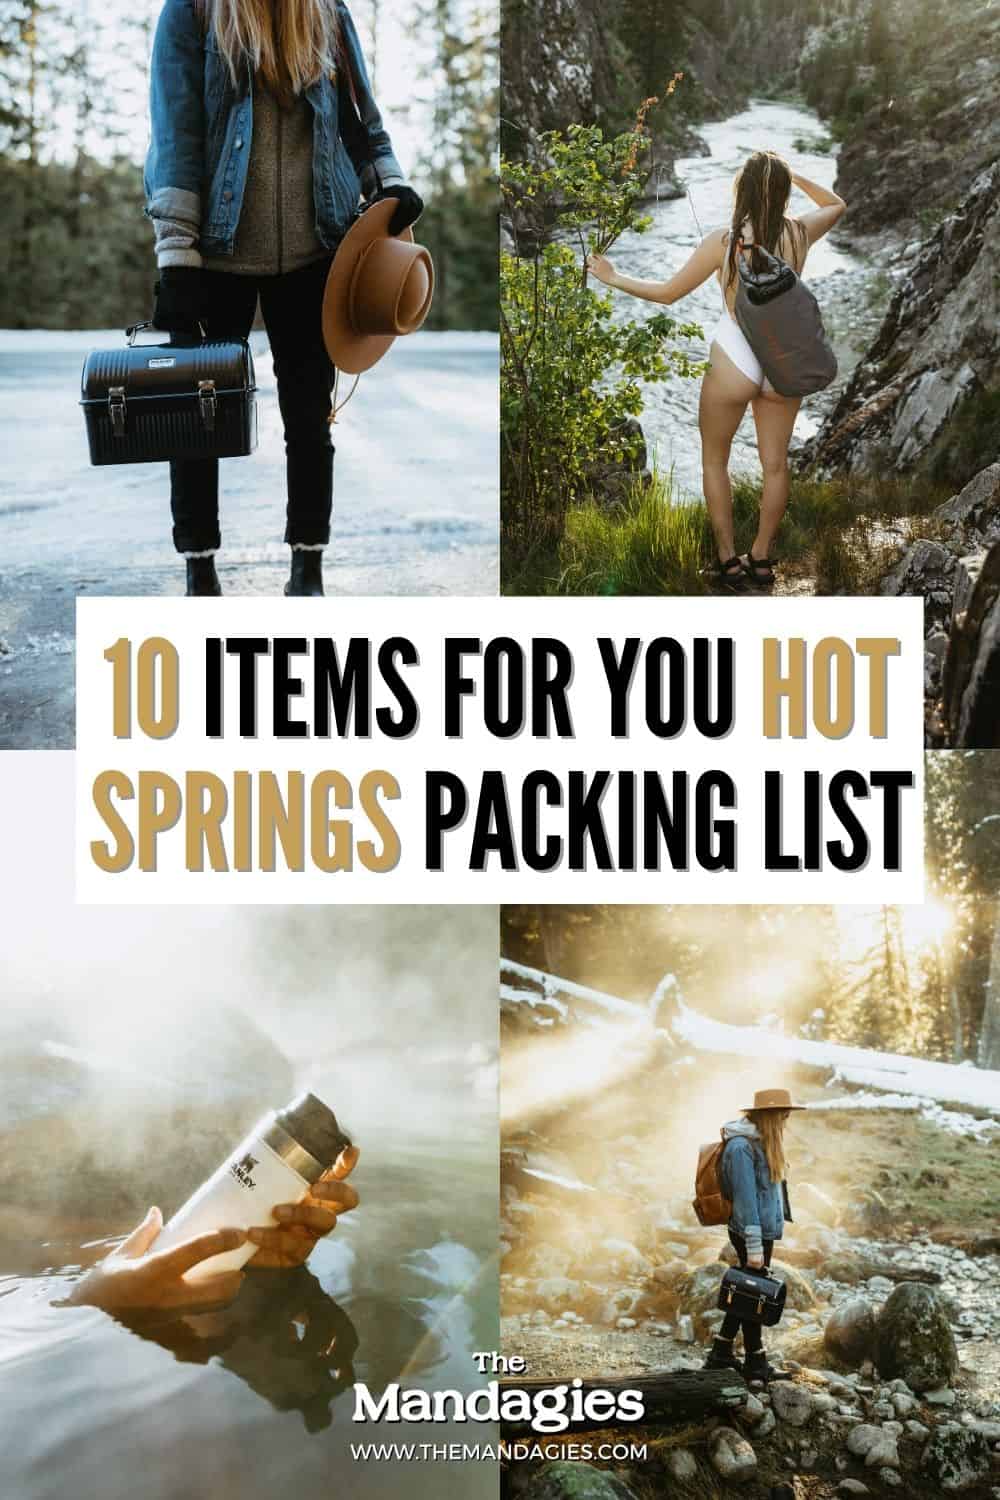 What should you pack for a hot spring? Discover the essentials to put on your hot springs packing list, for a responsible and ethical soak! We're sharing everything from the basic towel and swimsuit, and even more gear for camping and trail hiking to the pools! #hotsprings #trail #camping #packinglist #hotspring #idaho #lolopass